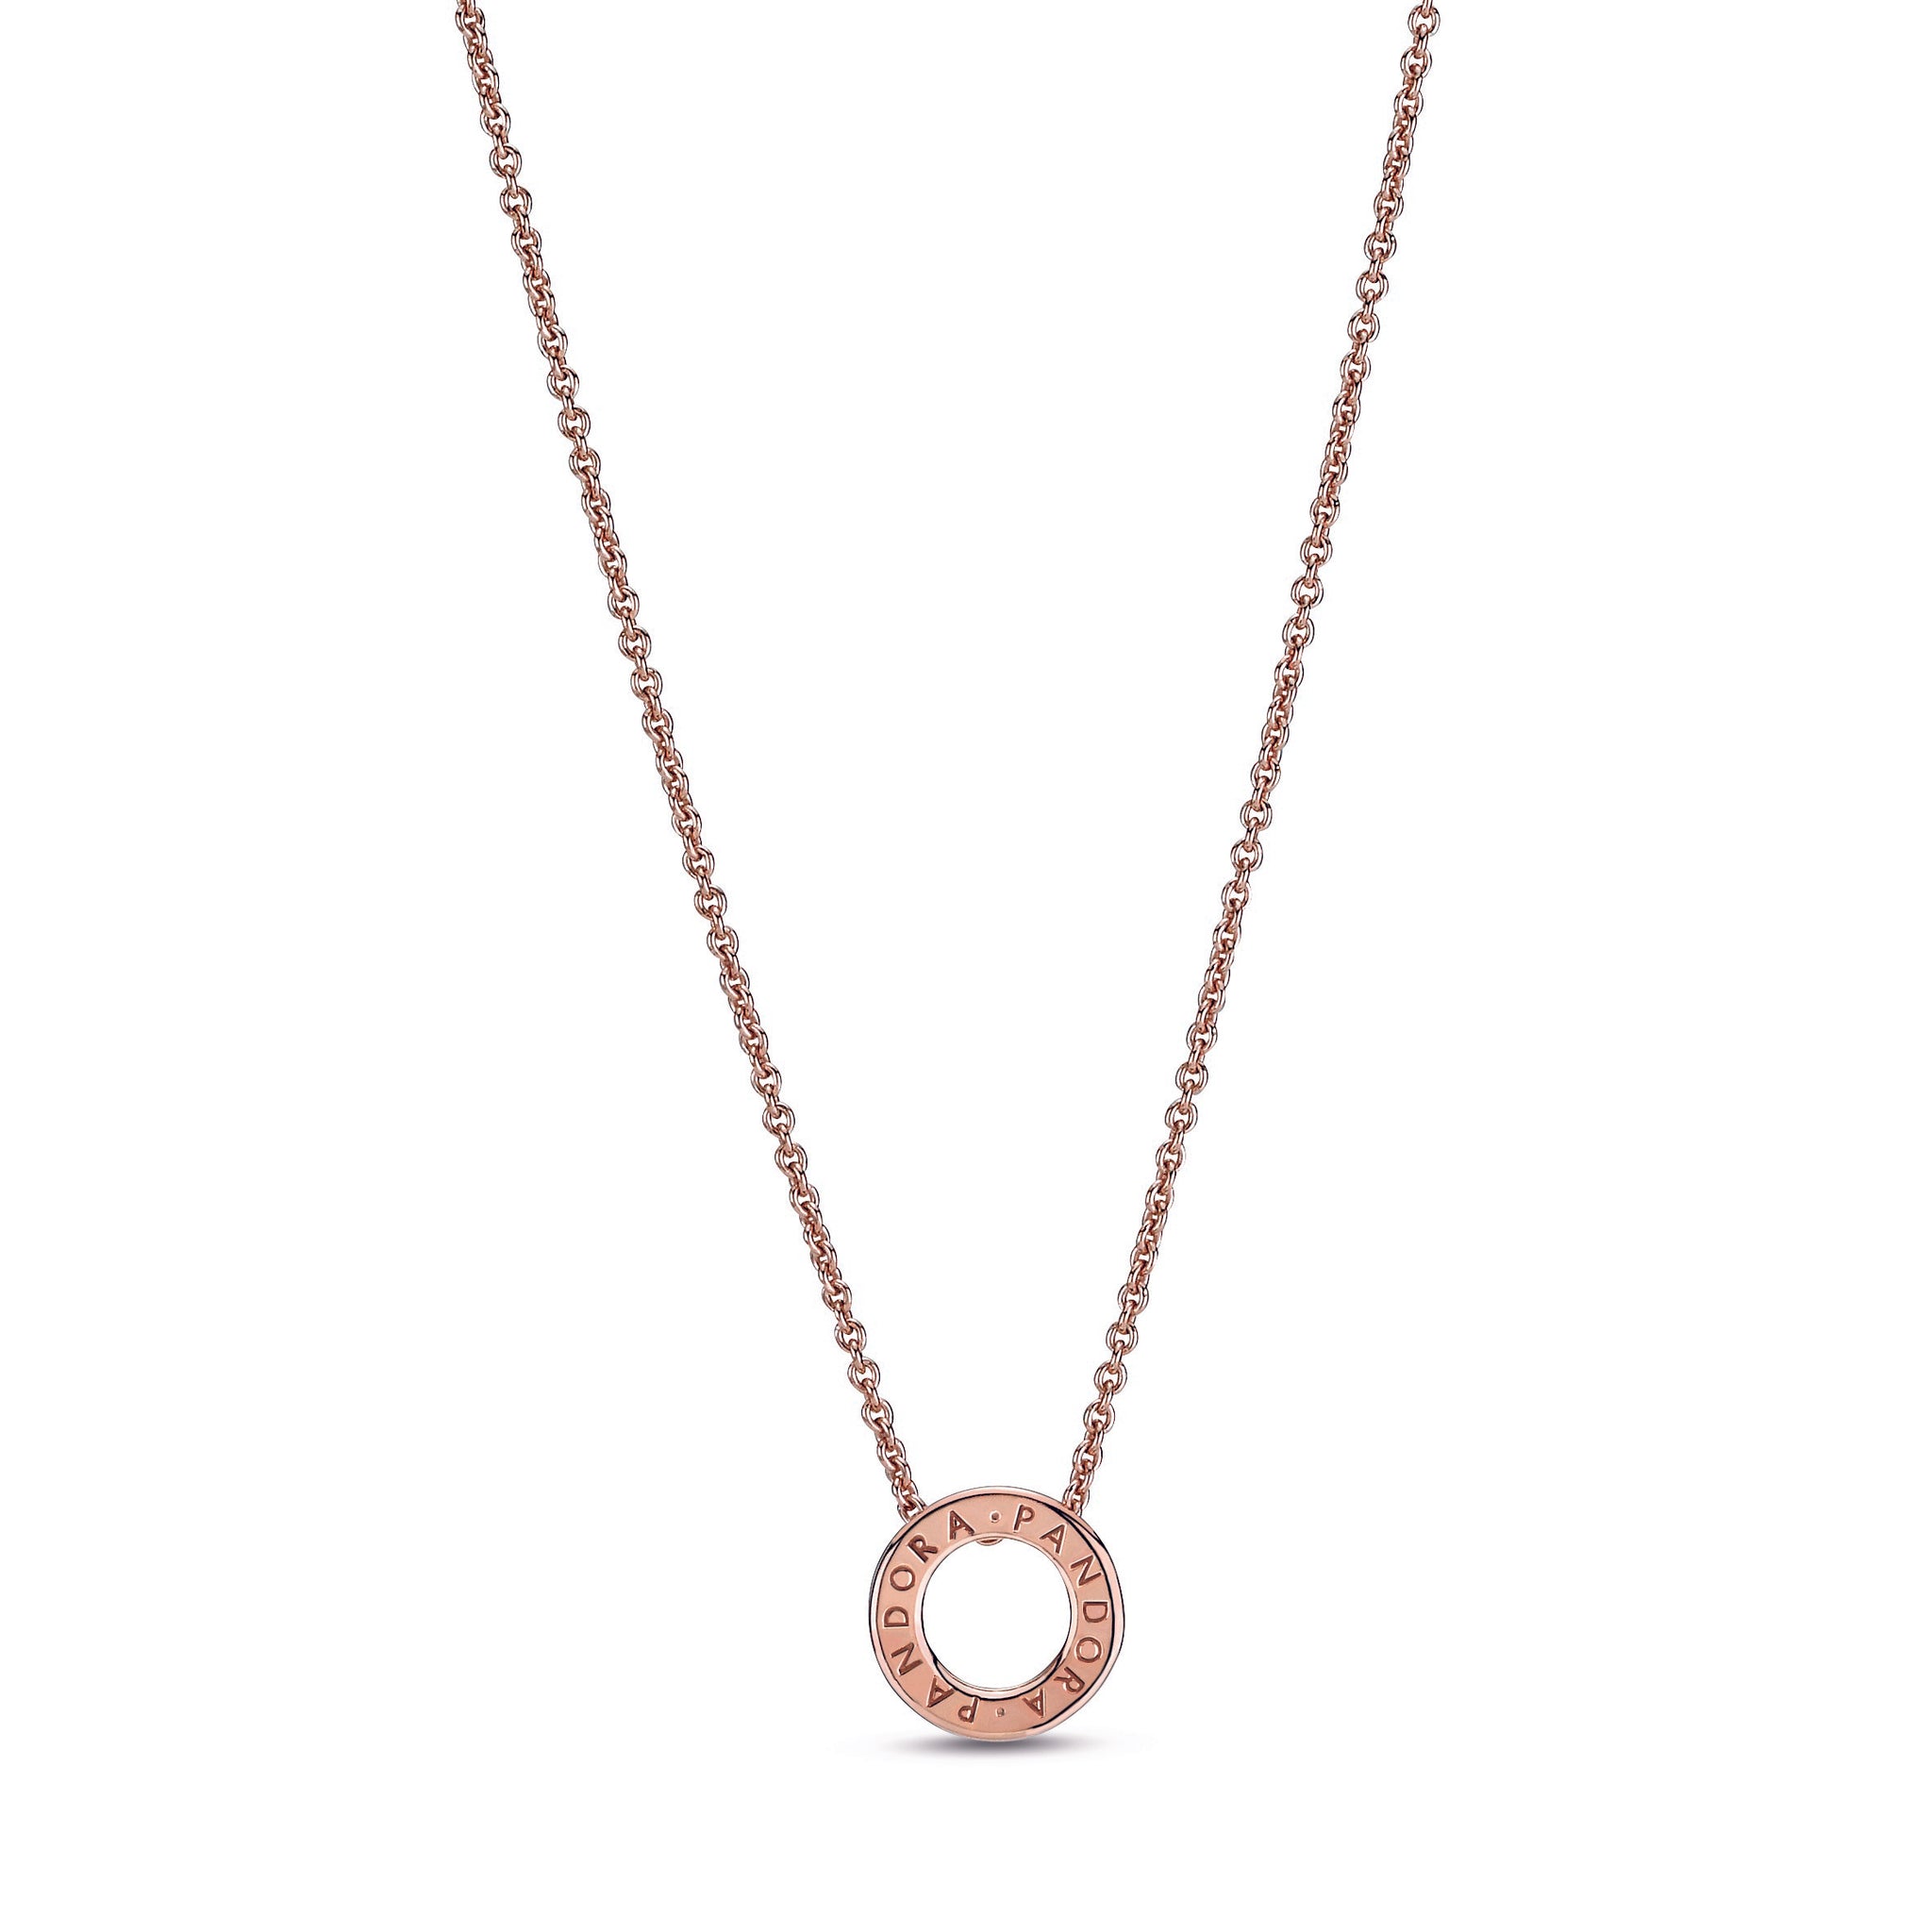 MODERN ROSE GOLD CIRCLE DIAMOND PENDANT NECKLACE, .48 CT TW - Howard's  Jewelry Center